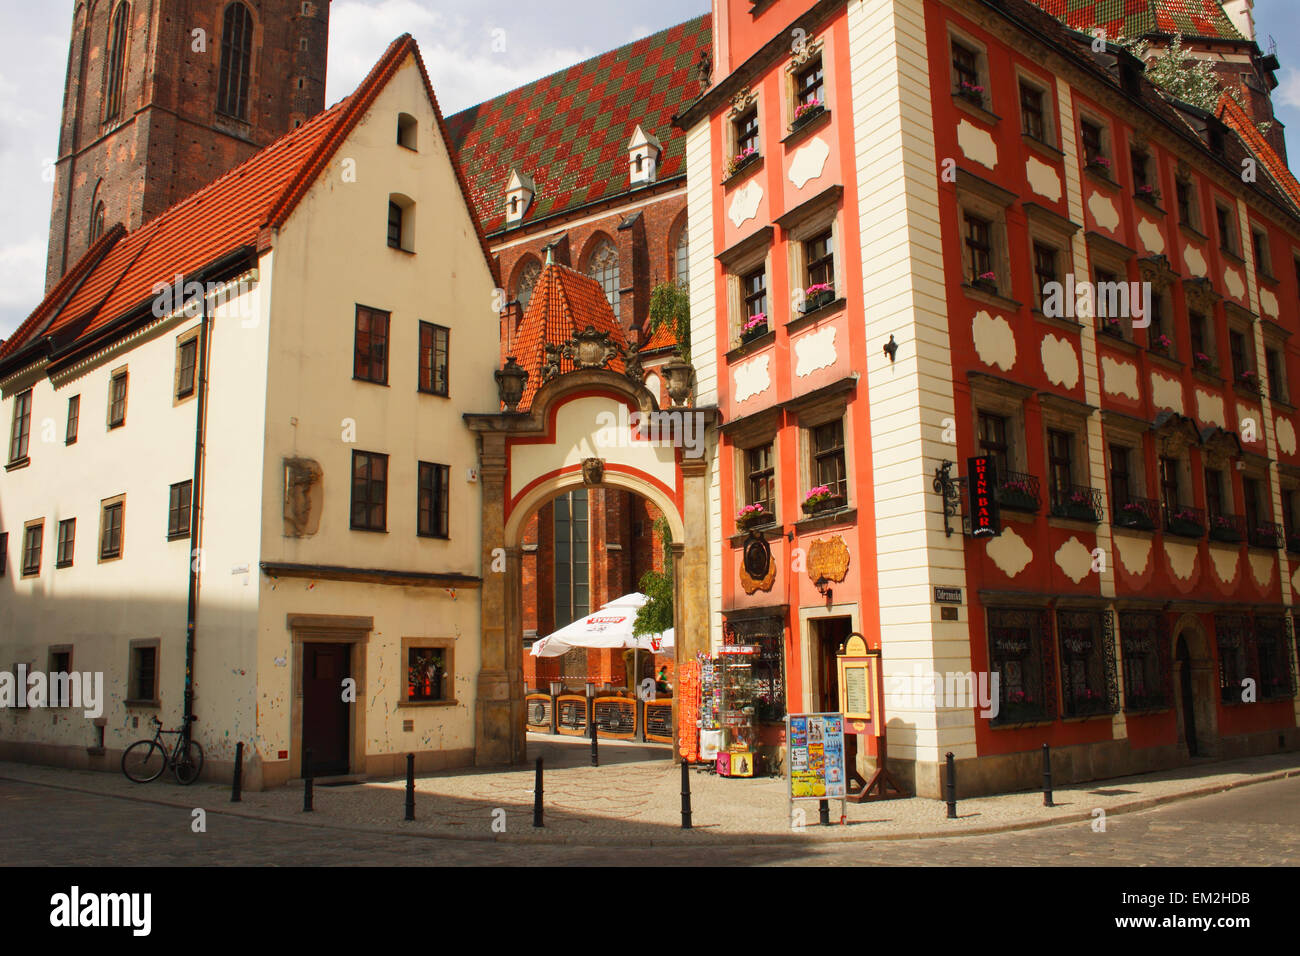 Archway Between Two Houses To St. Elizabeth's Church Off Rynek Square; Wroclaw Poland Stock Photo